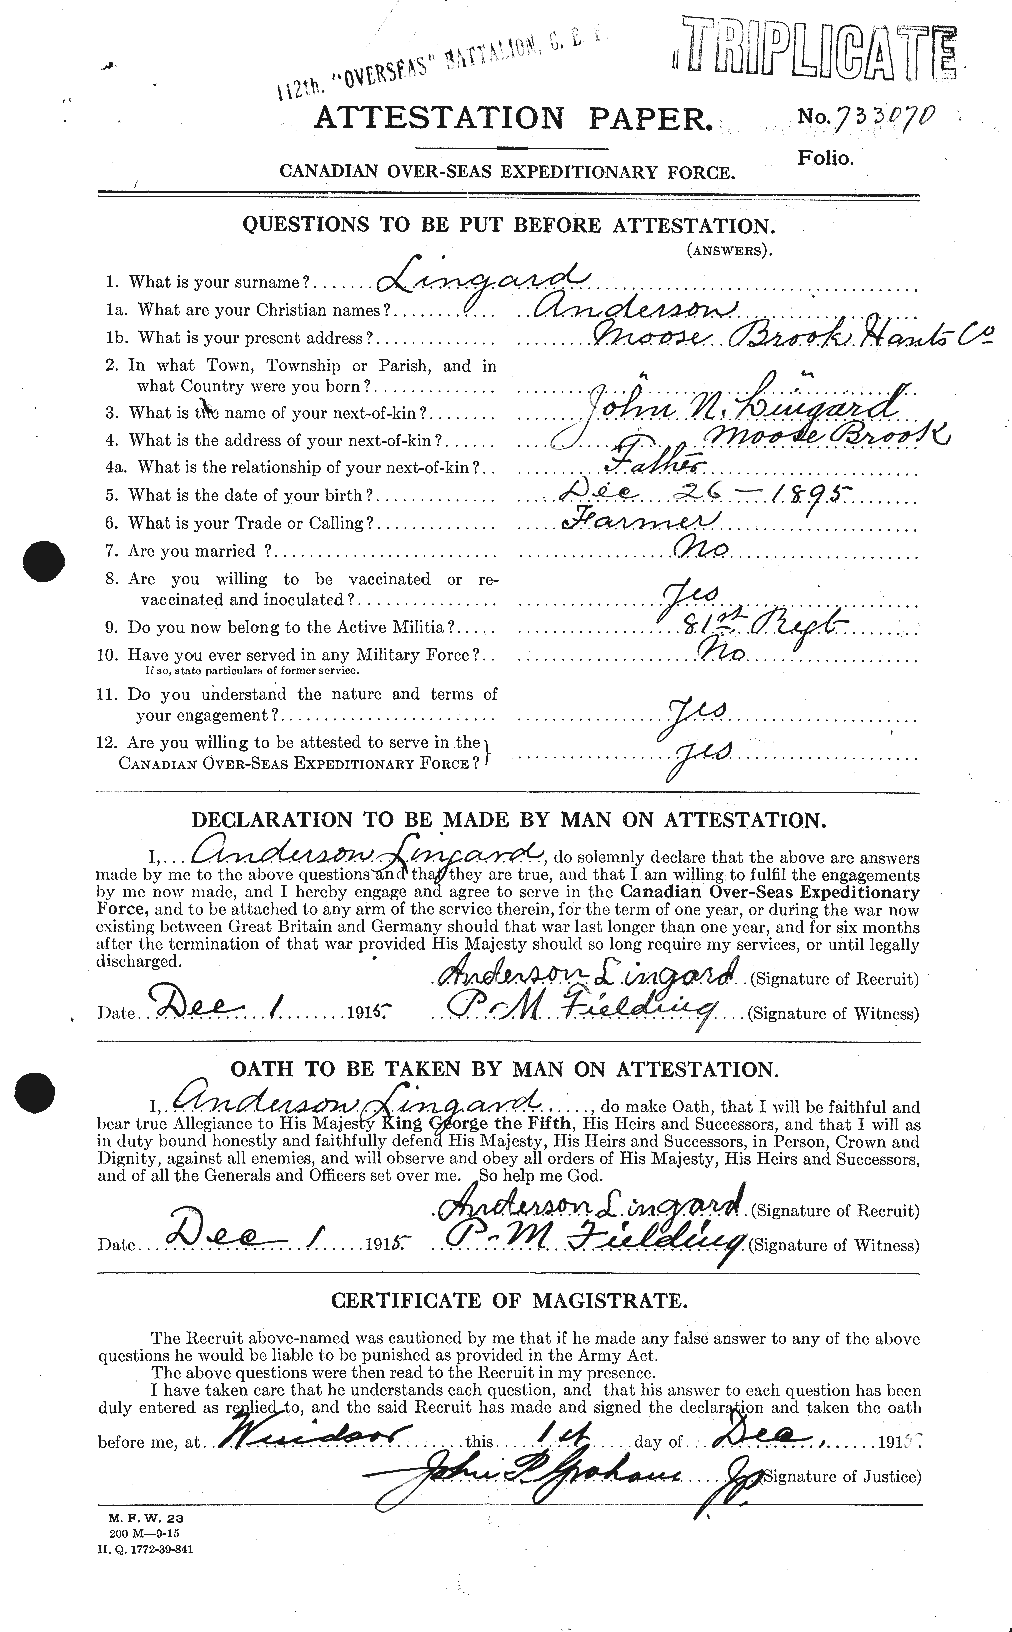 Personnel Records of the First World War - CEF 467942a